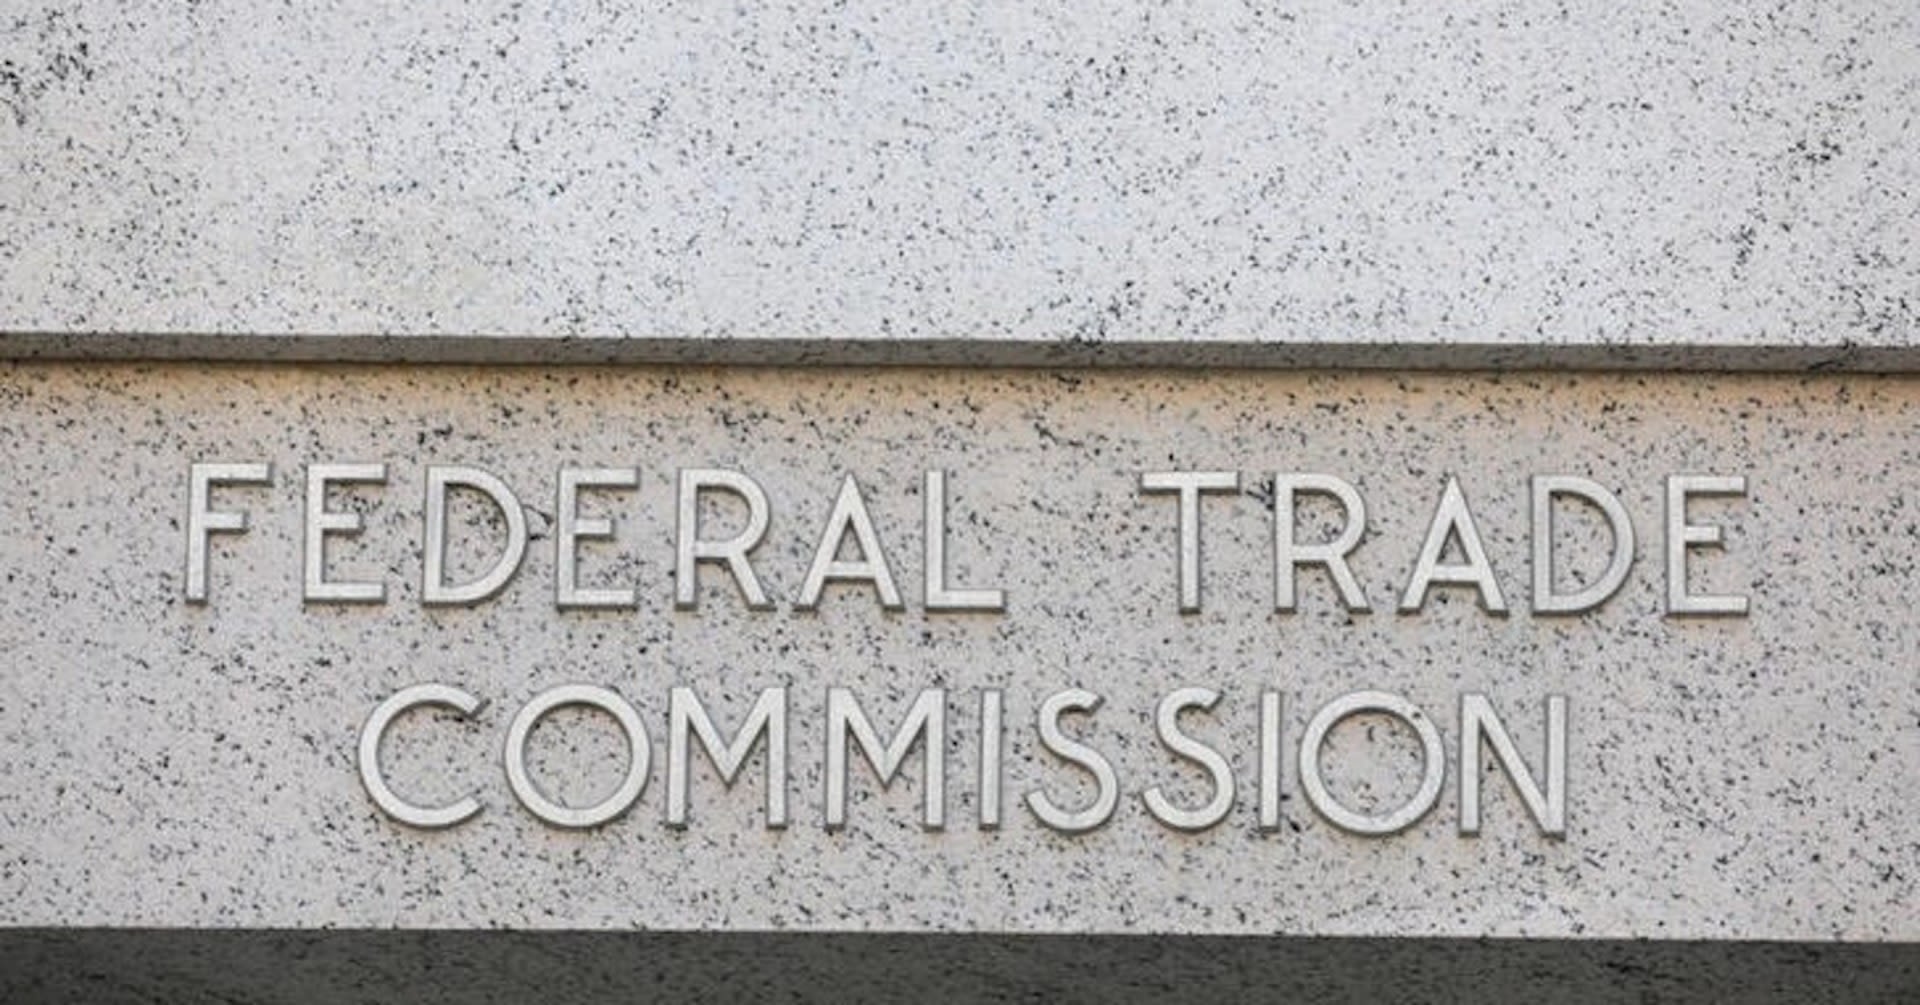 The Federal Trade Commission's attempt to ban U.S. non-compete agreements: Why and what next?